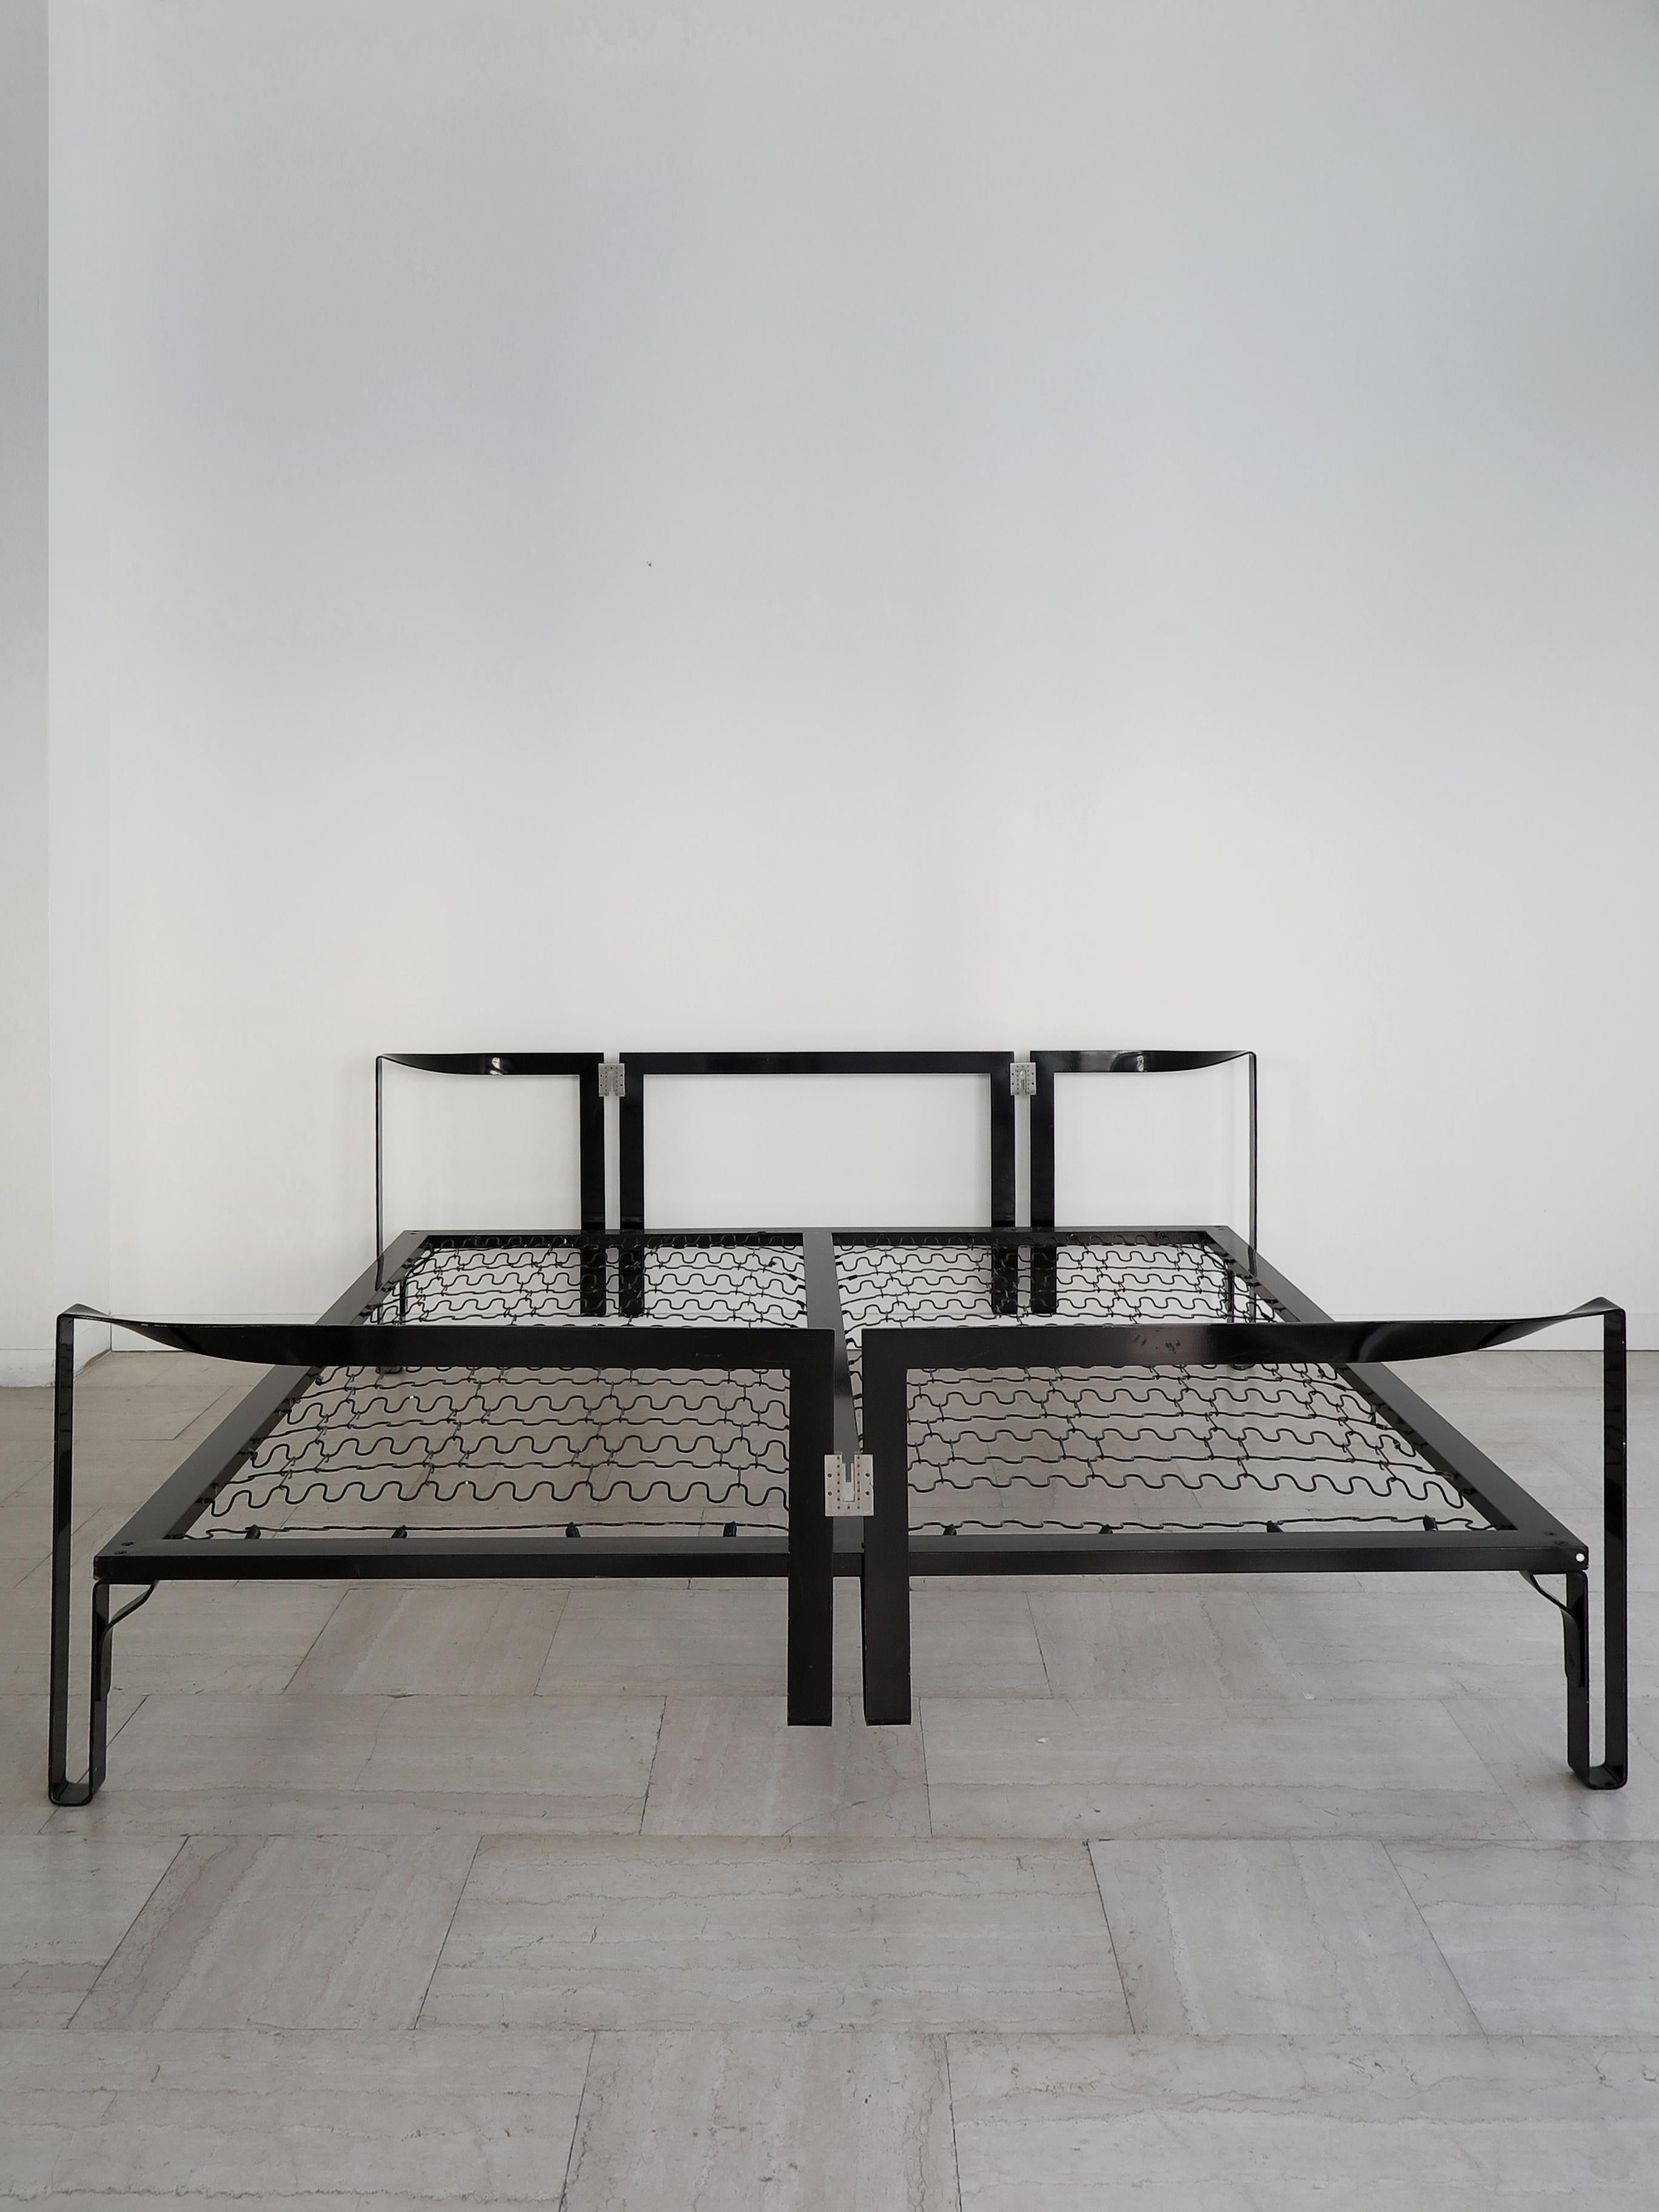 Italian Mid-Century Modern design double bed model Vanessa, designed by Tobia Scarpa and produced by Gavina since 1962 composed of a curved black painted metal band completely disassembled, Gavina spa Made in Italy adhesive label, 1960s.

Please